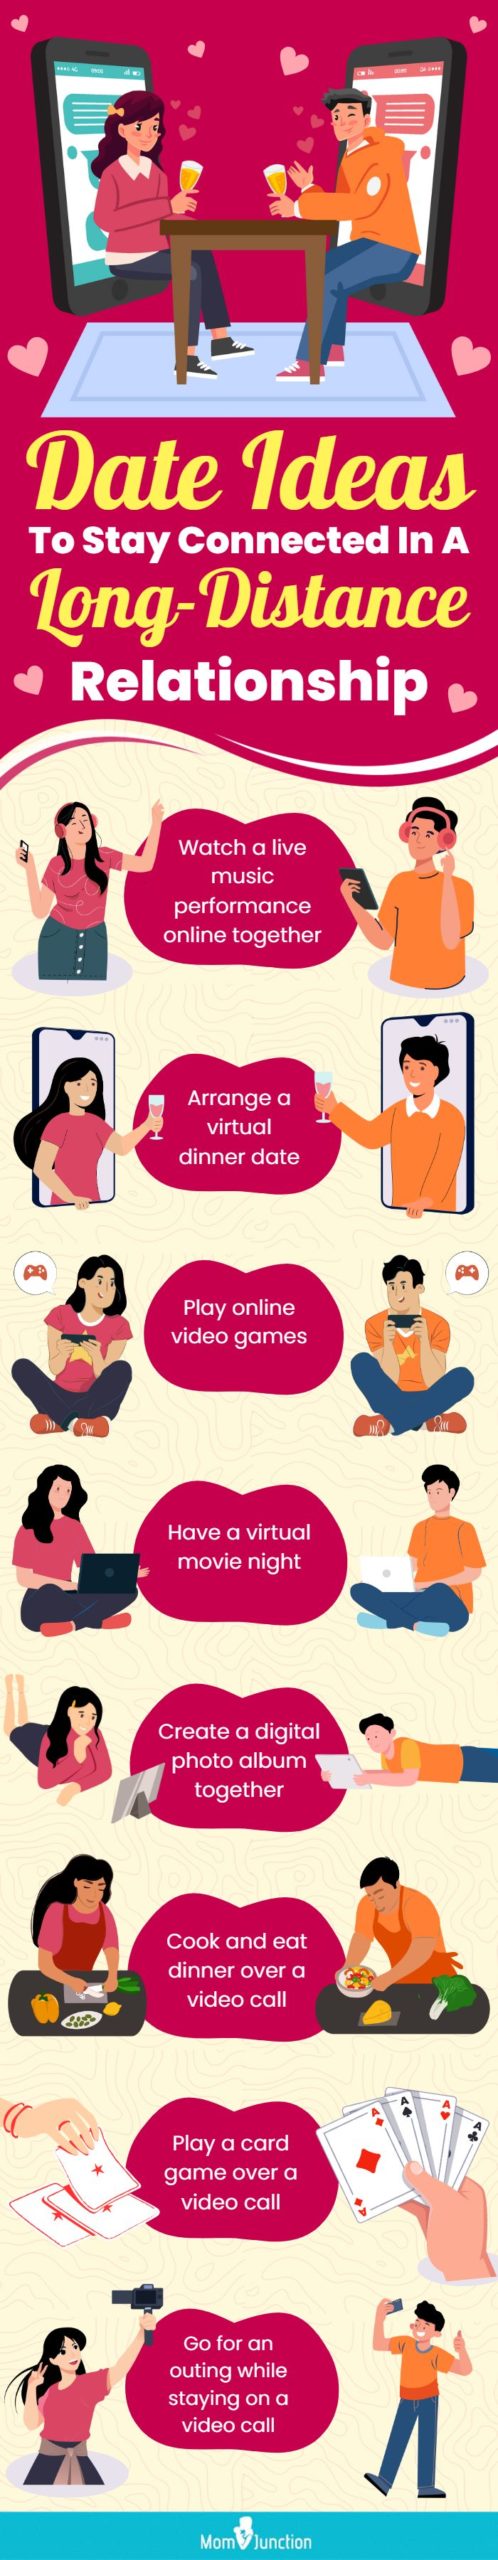 date ideas to stay connected in a long distance relationship (infographic)